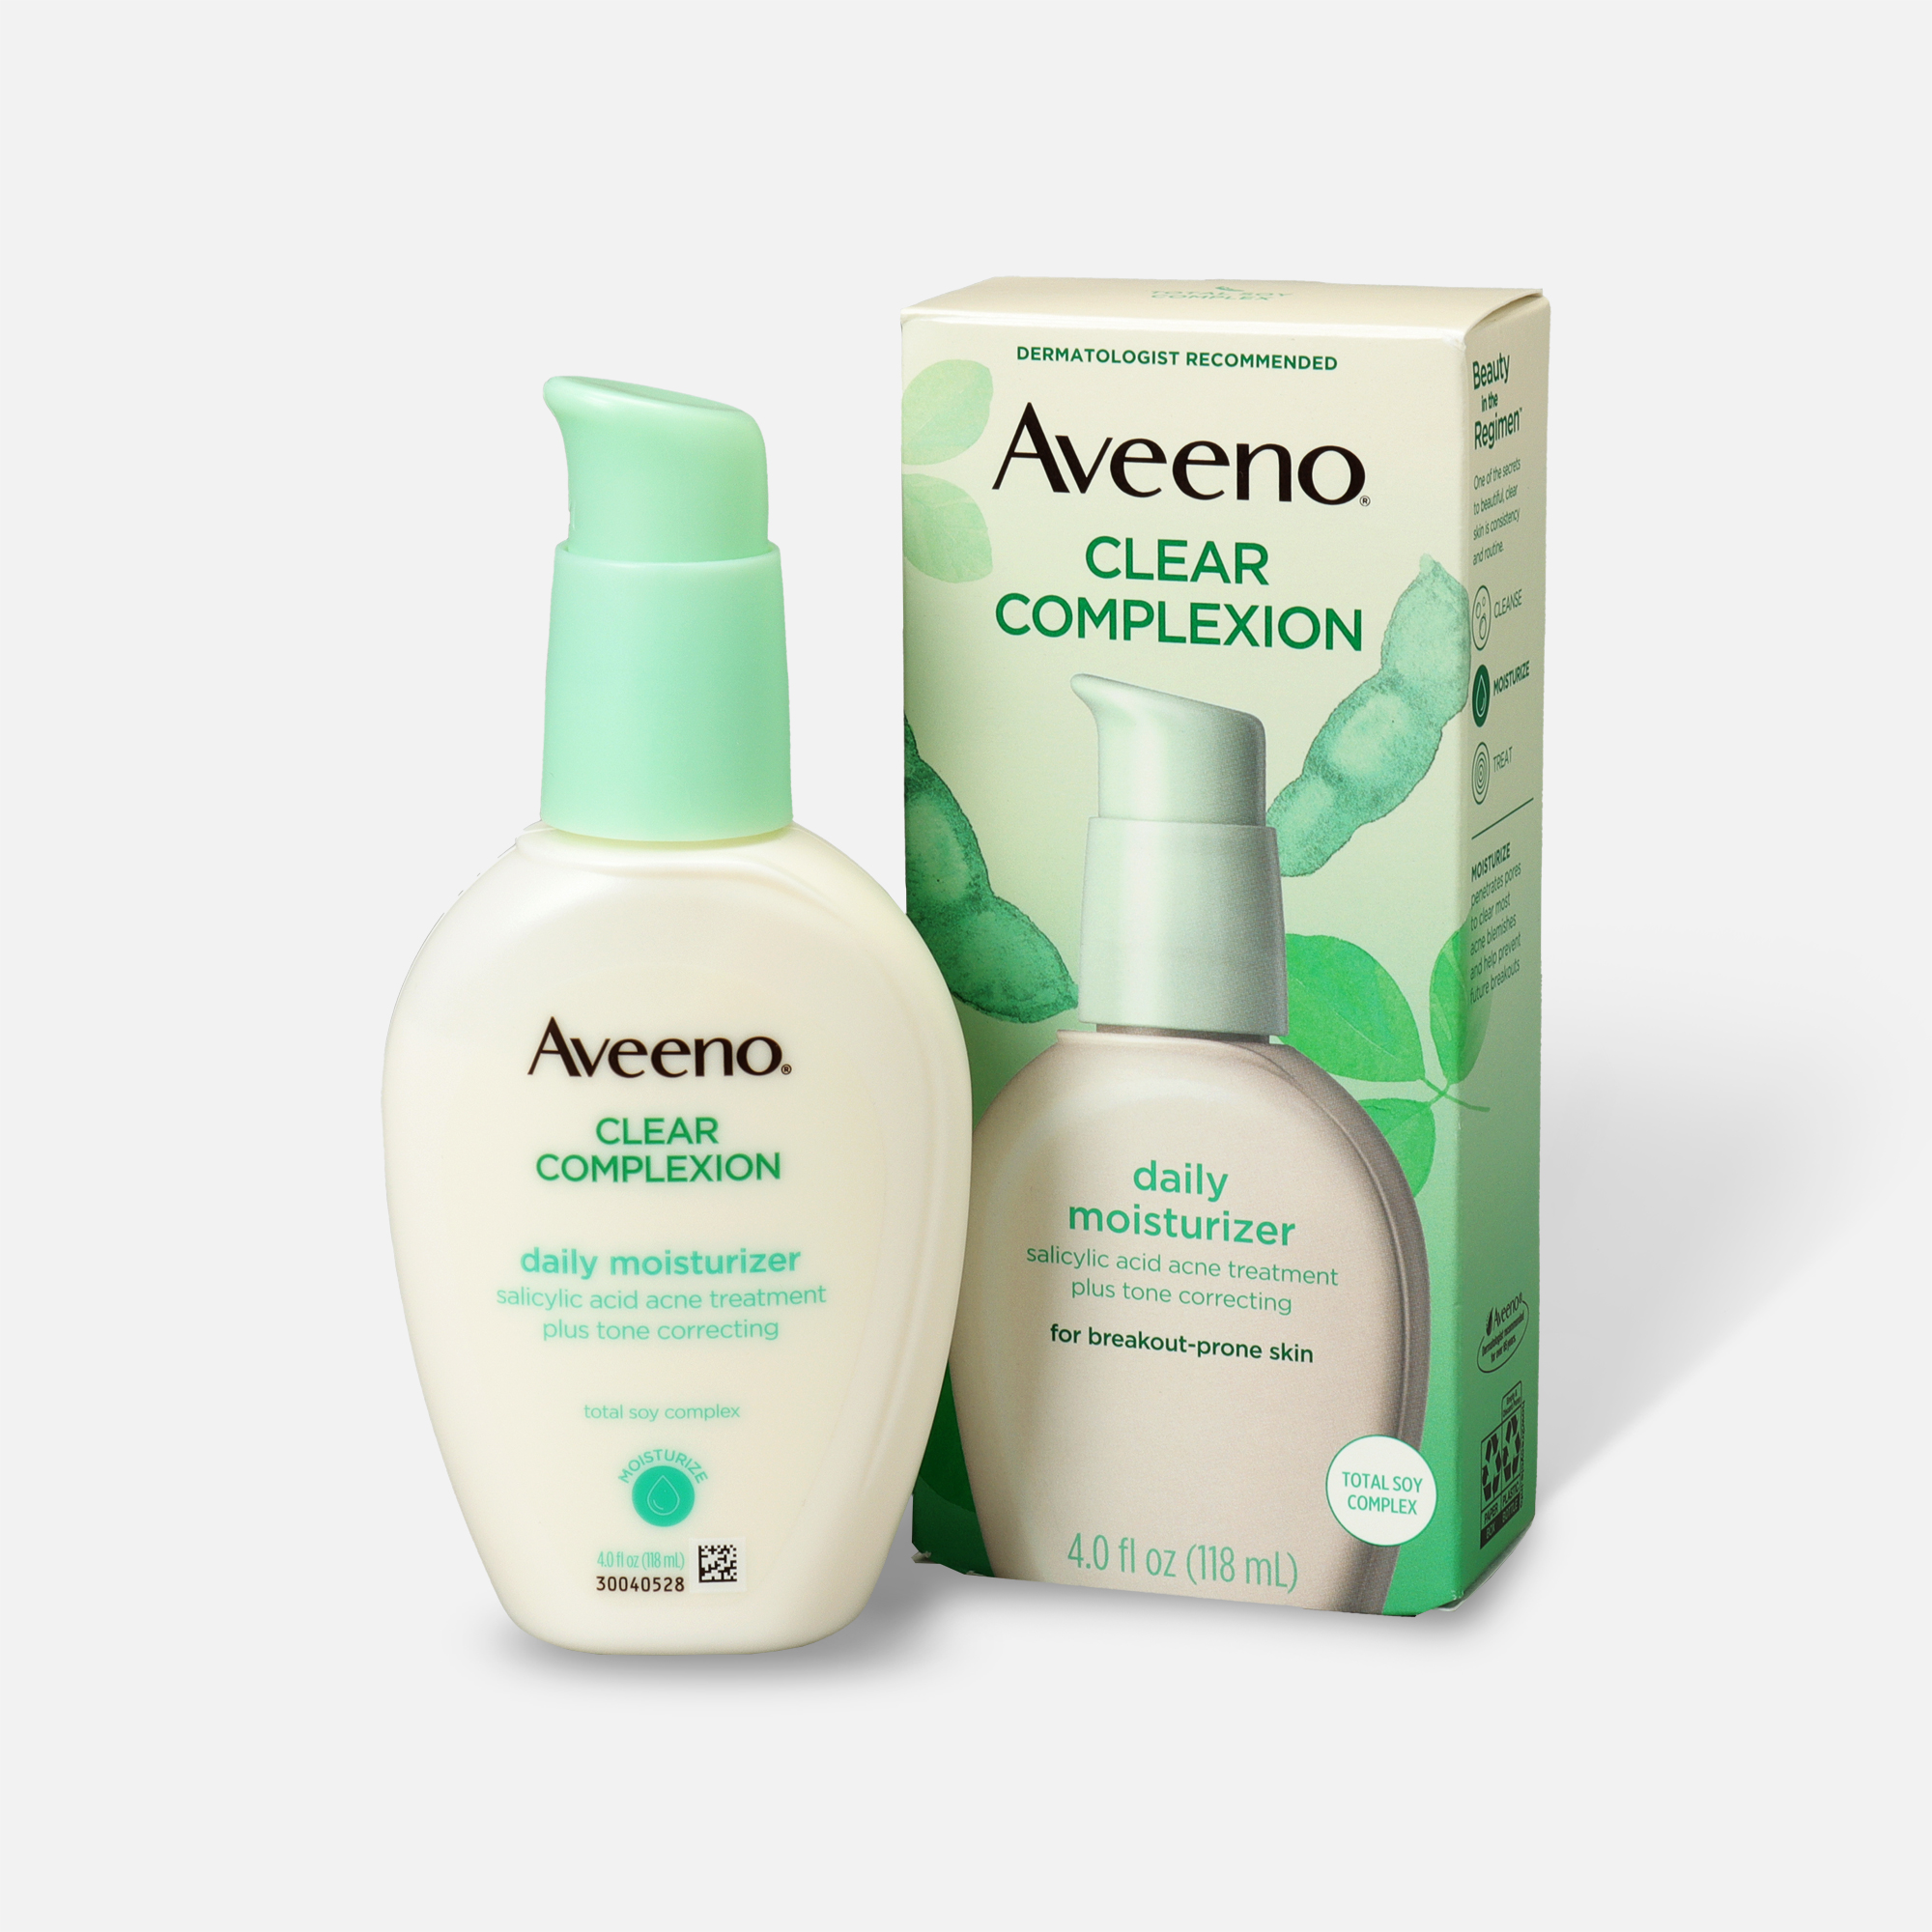 Aveeno Clear Complexion Face Moisturizer,